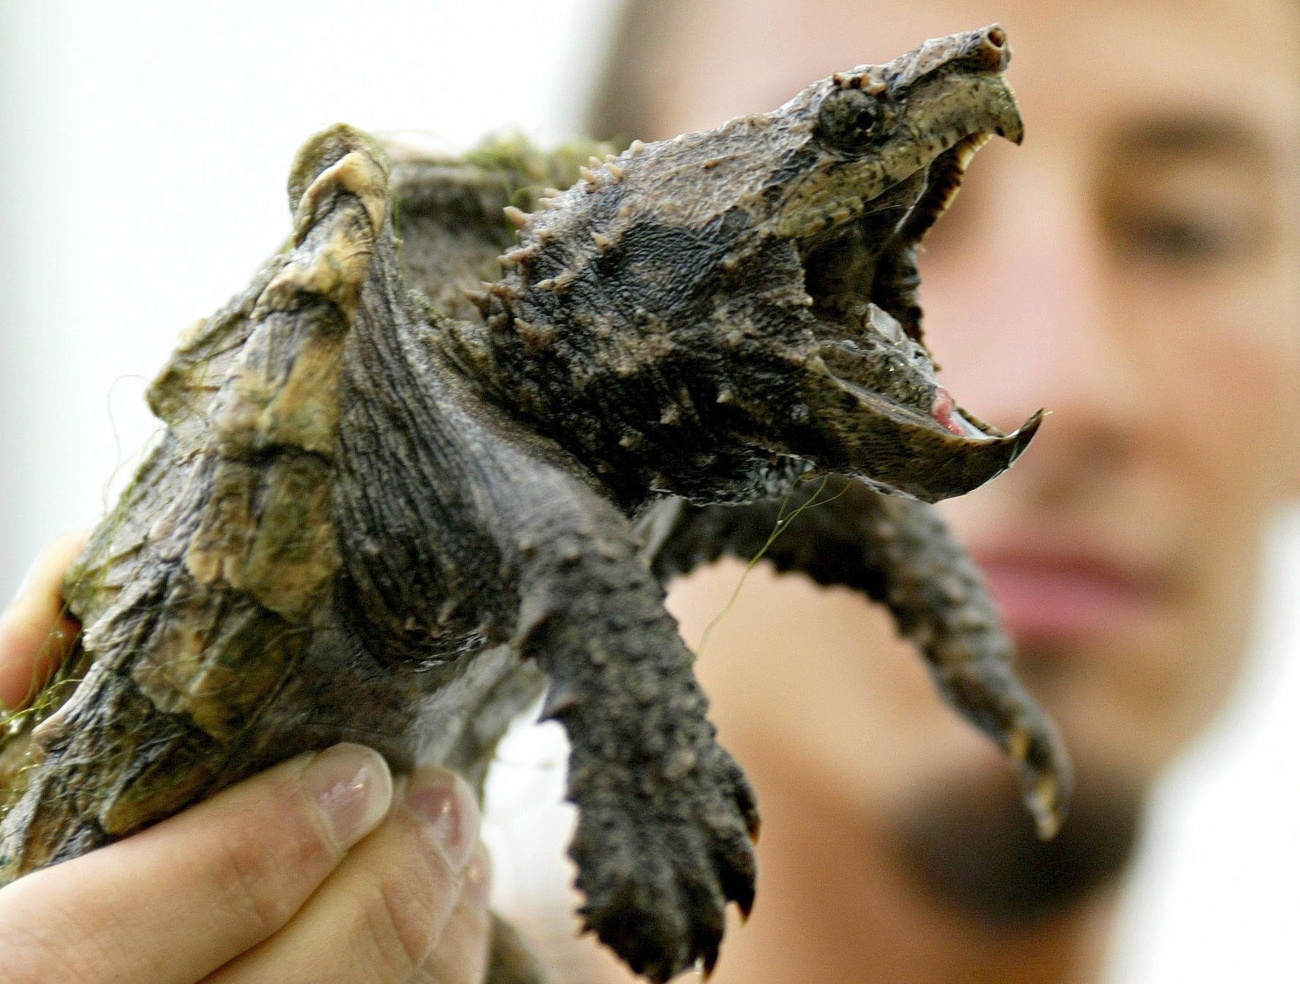 Invasive North American snapping turtle has been found in canton Vaud in switzerland